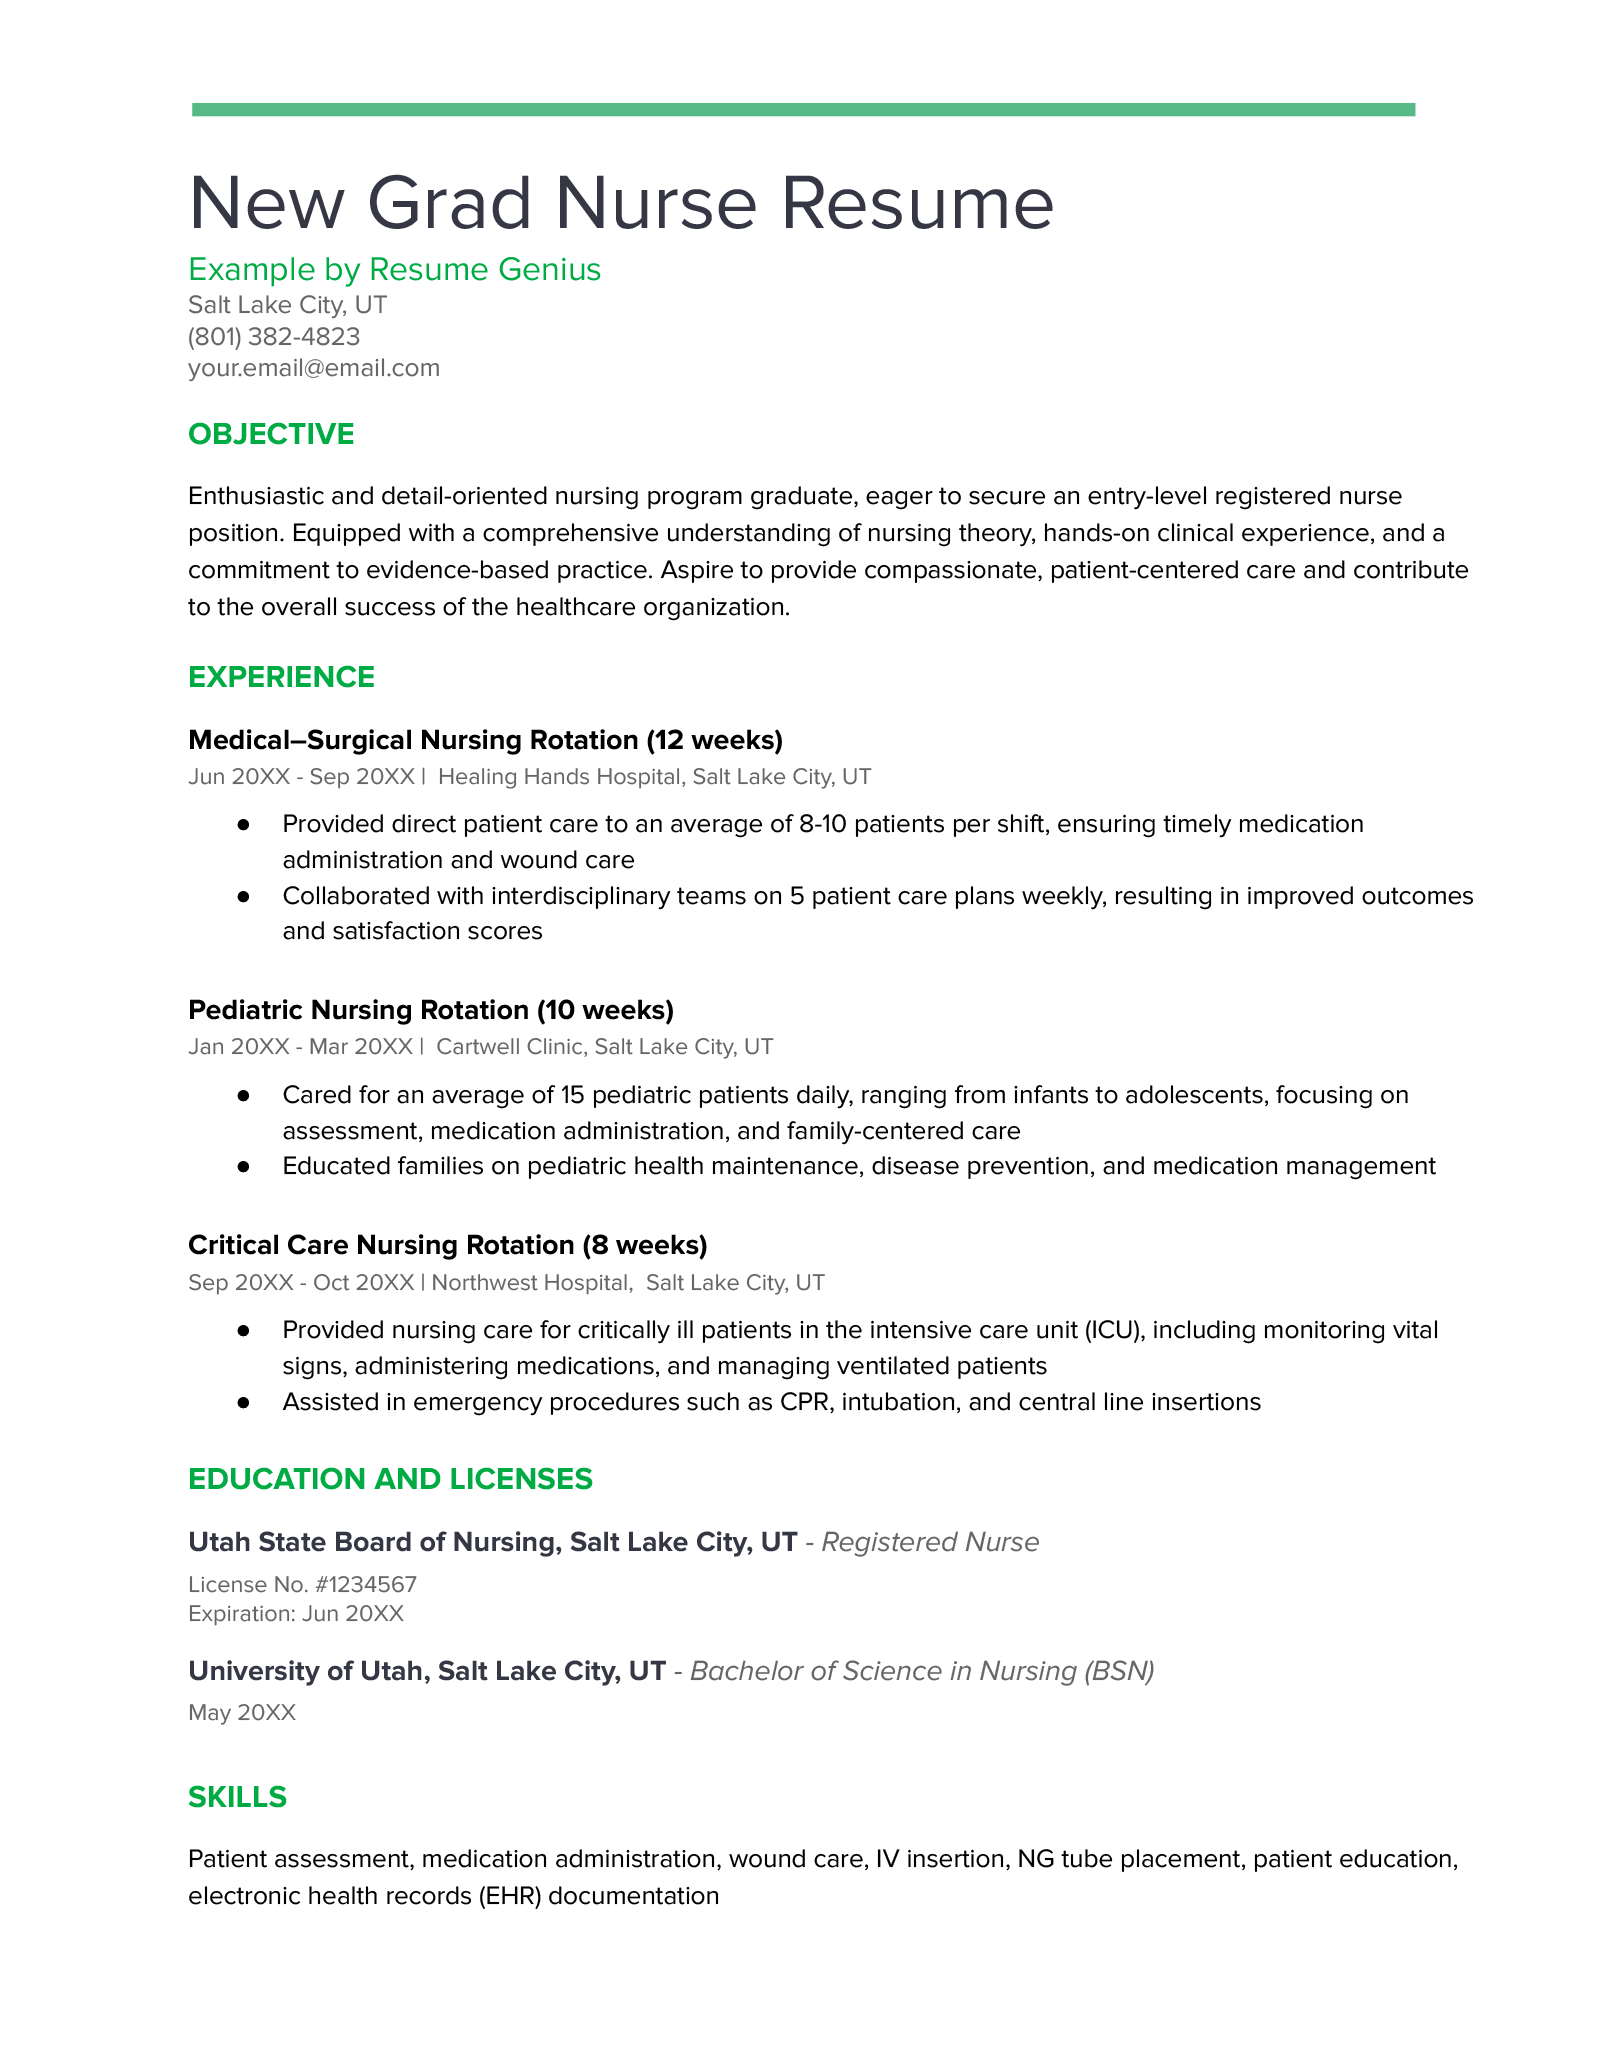 An example resume for a new grad nurse.